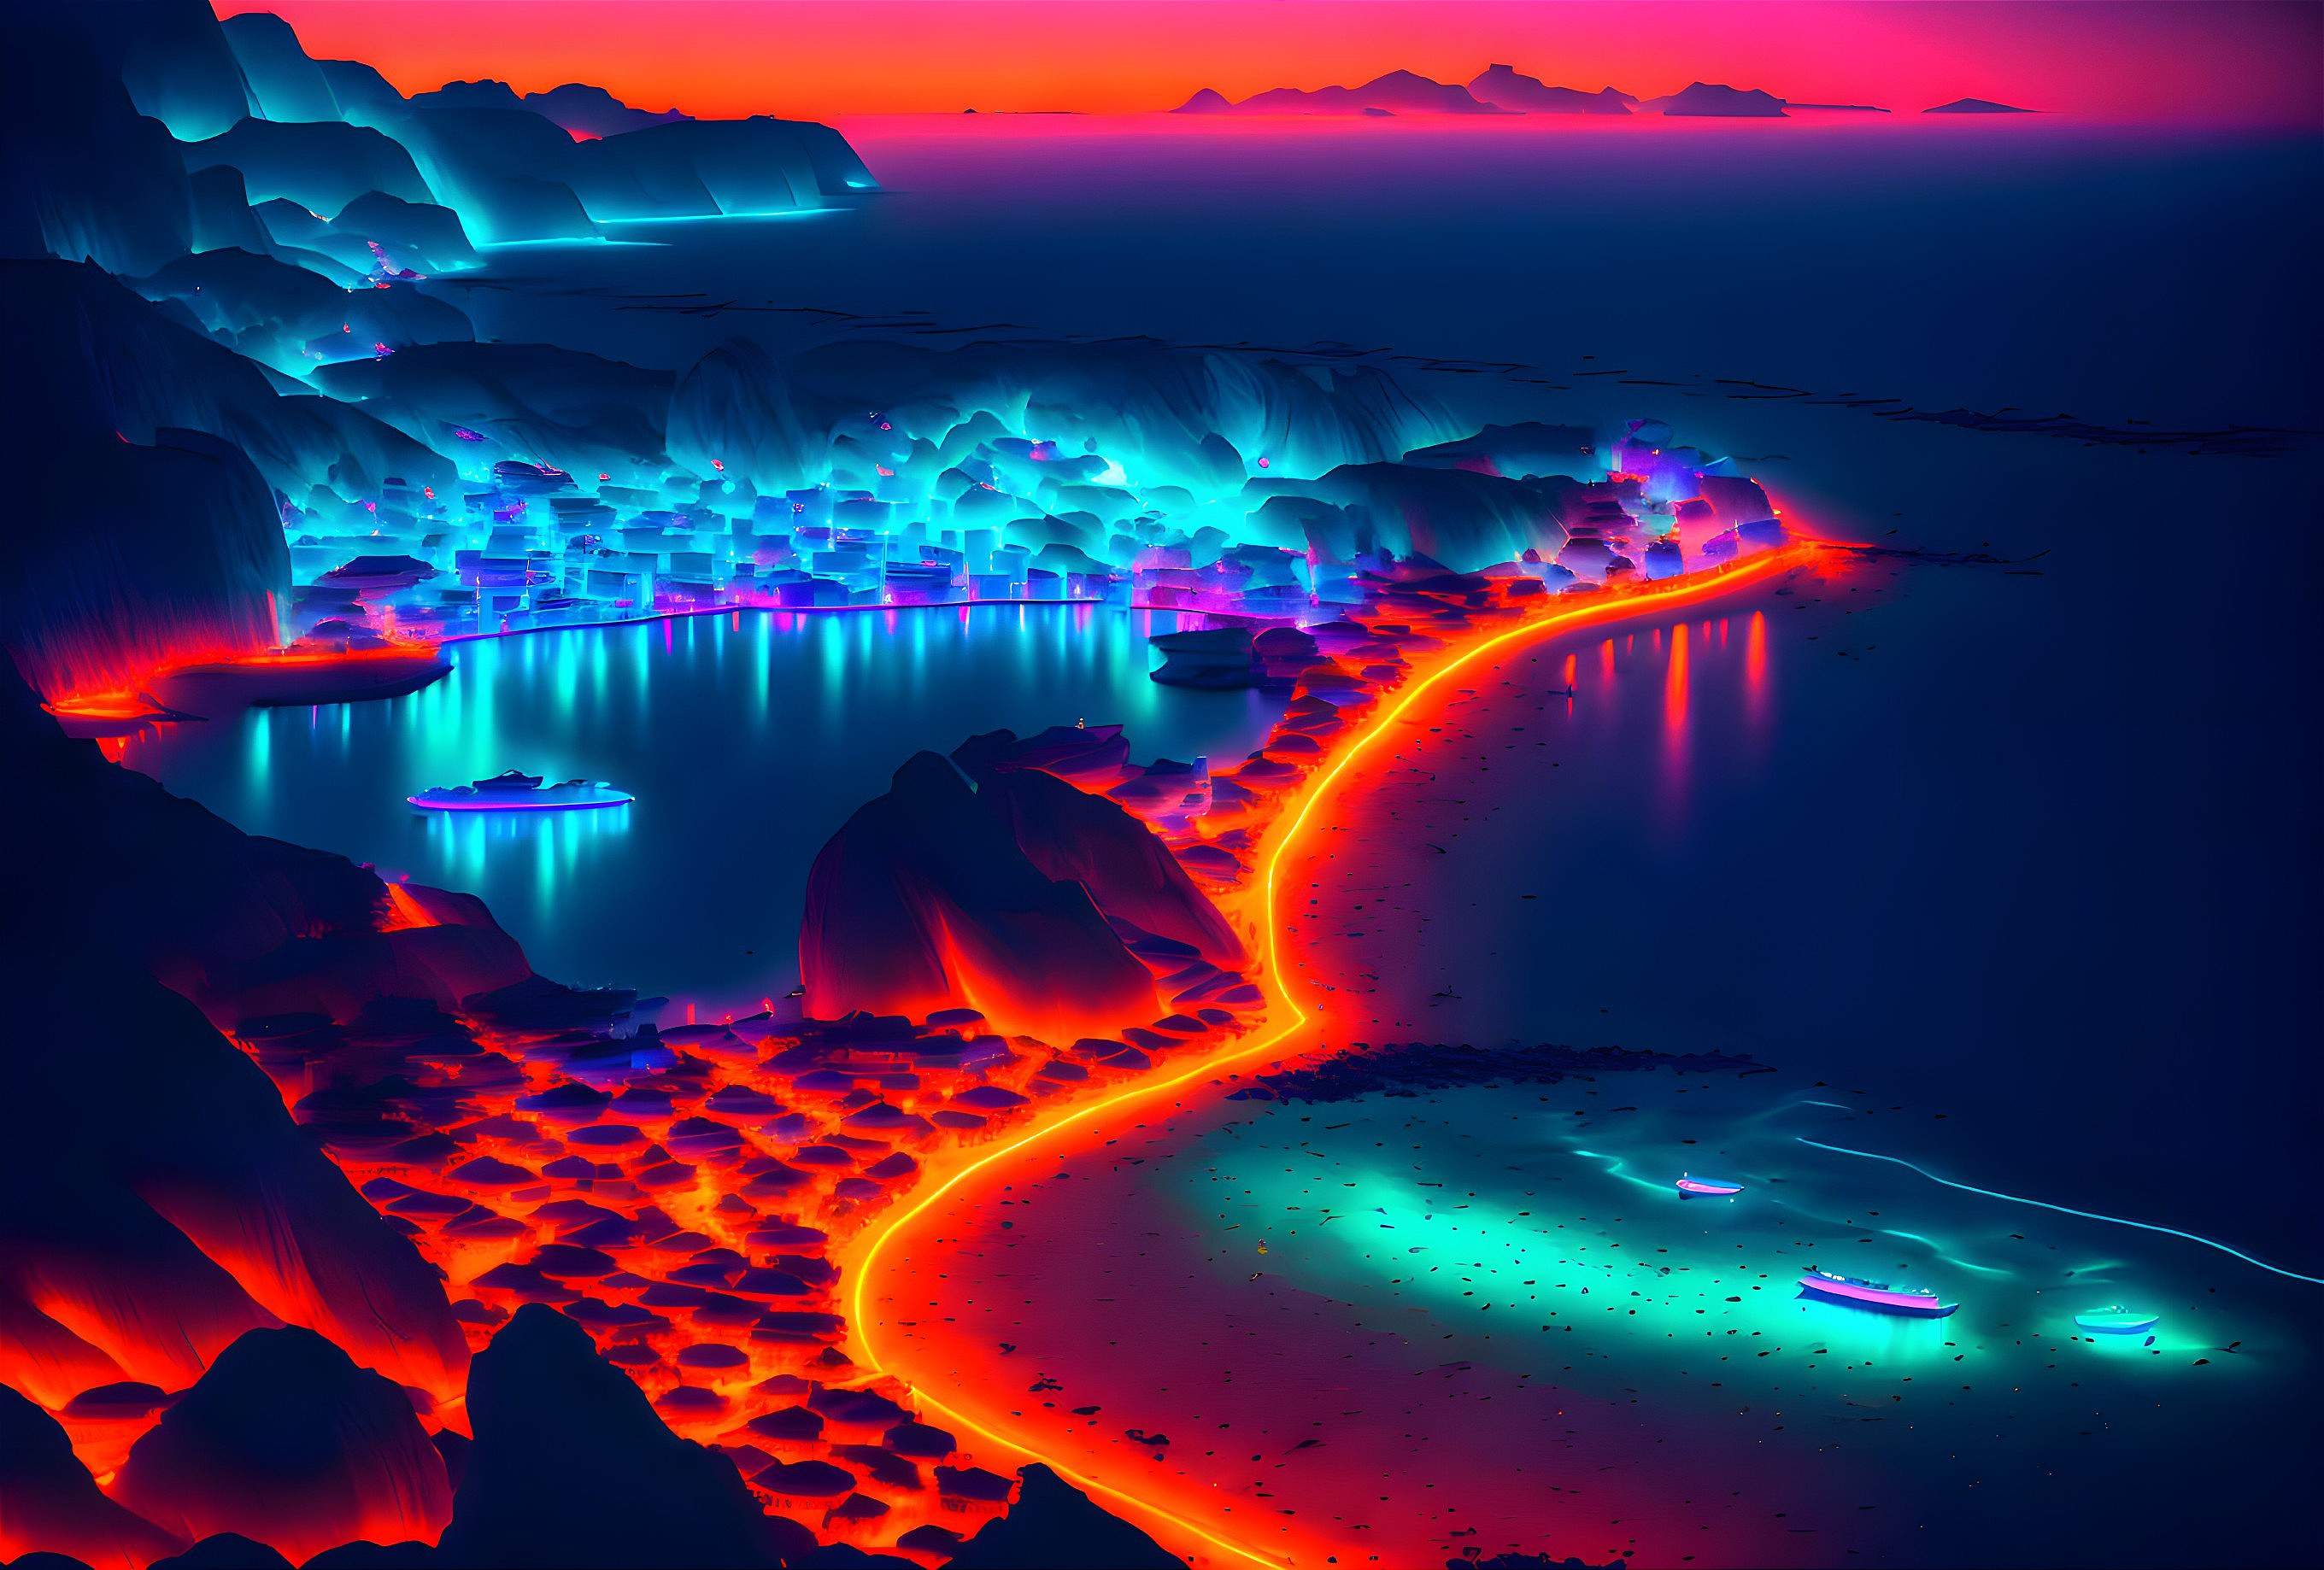 Seaside city lit by neon with a bioluminescence